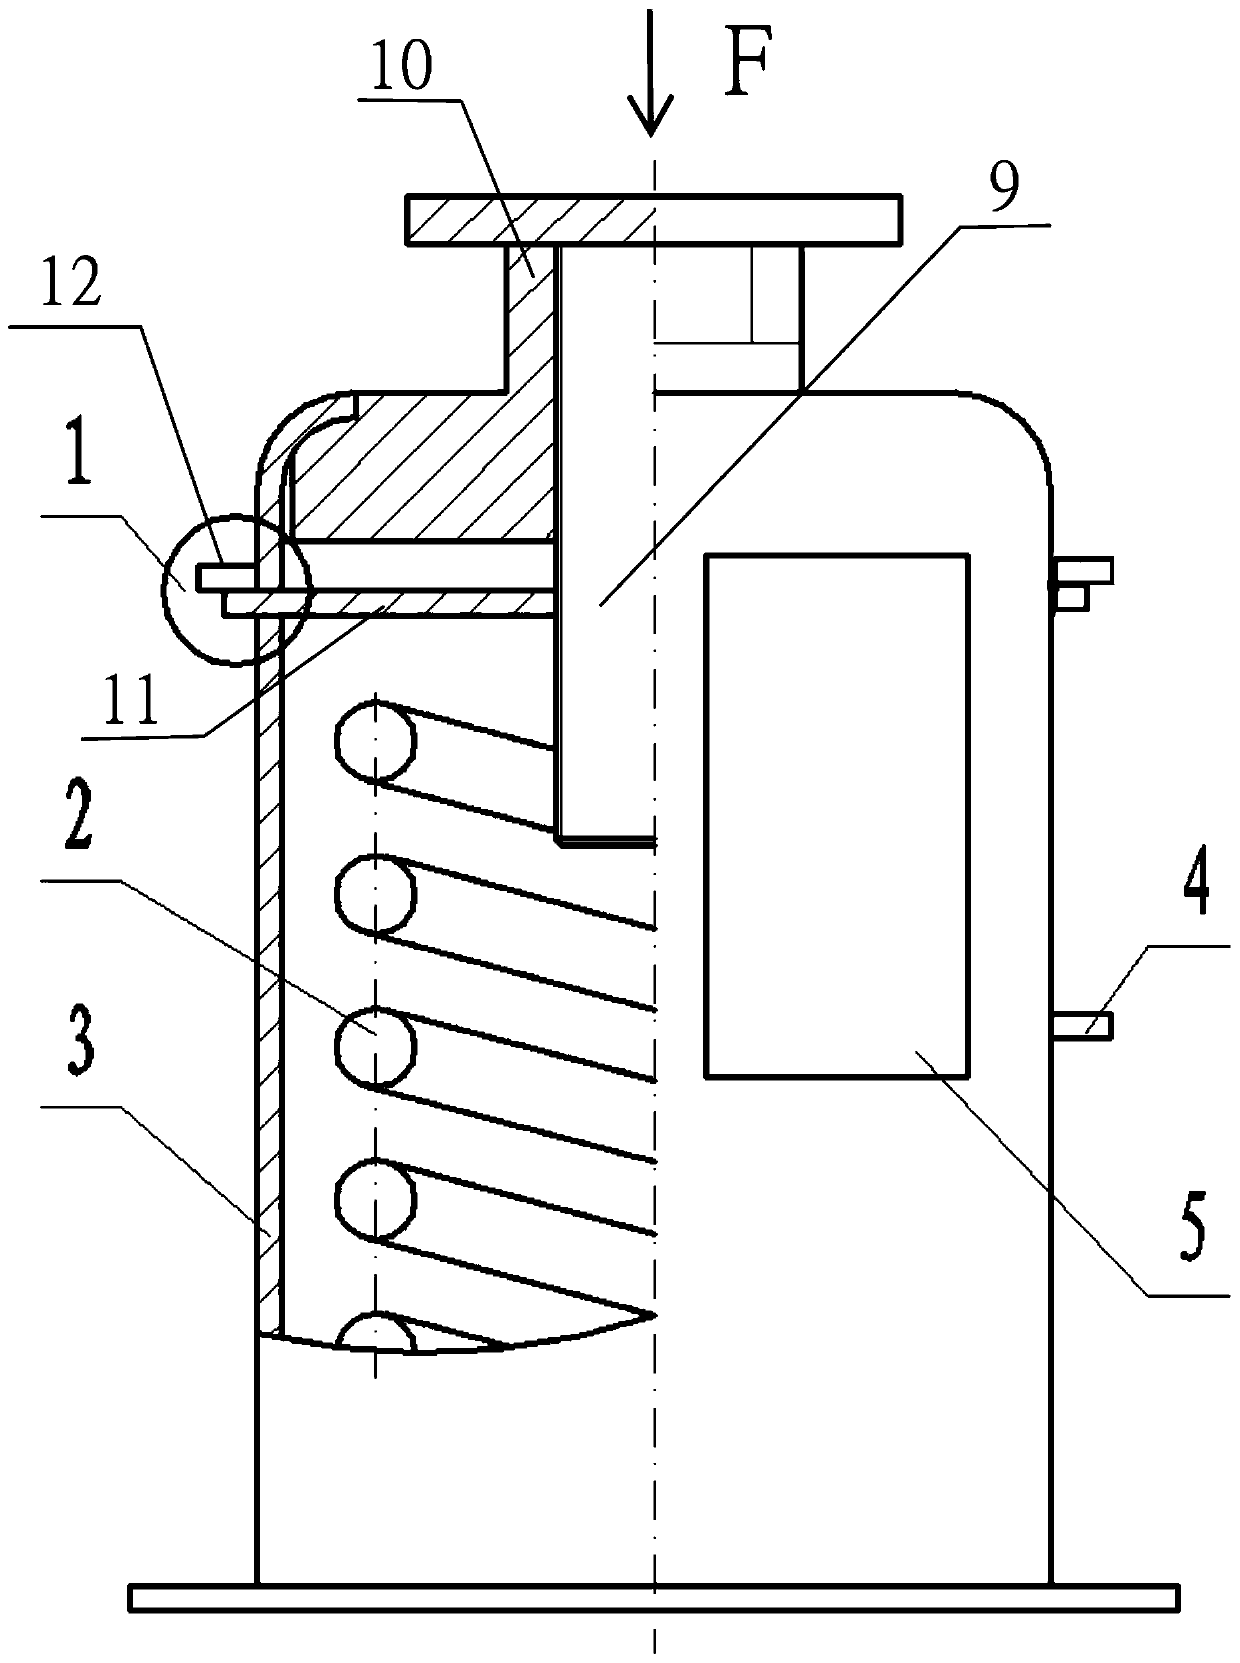 Spring assembly with limiting device